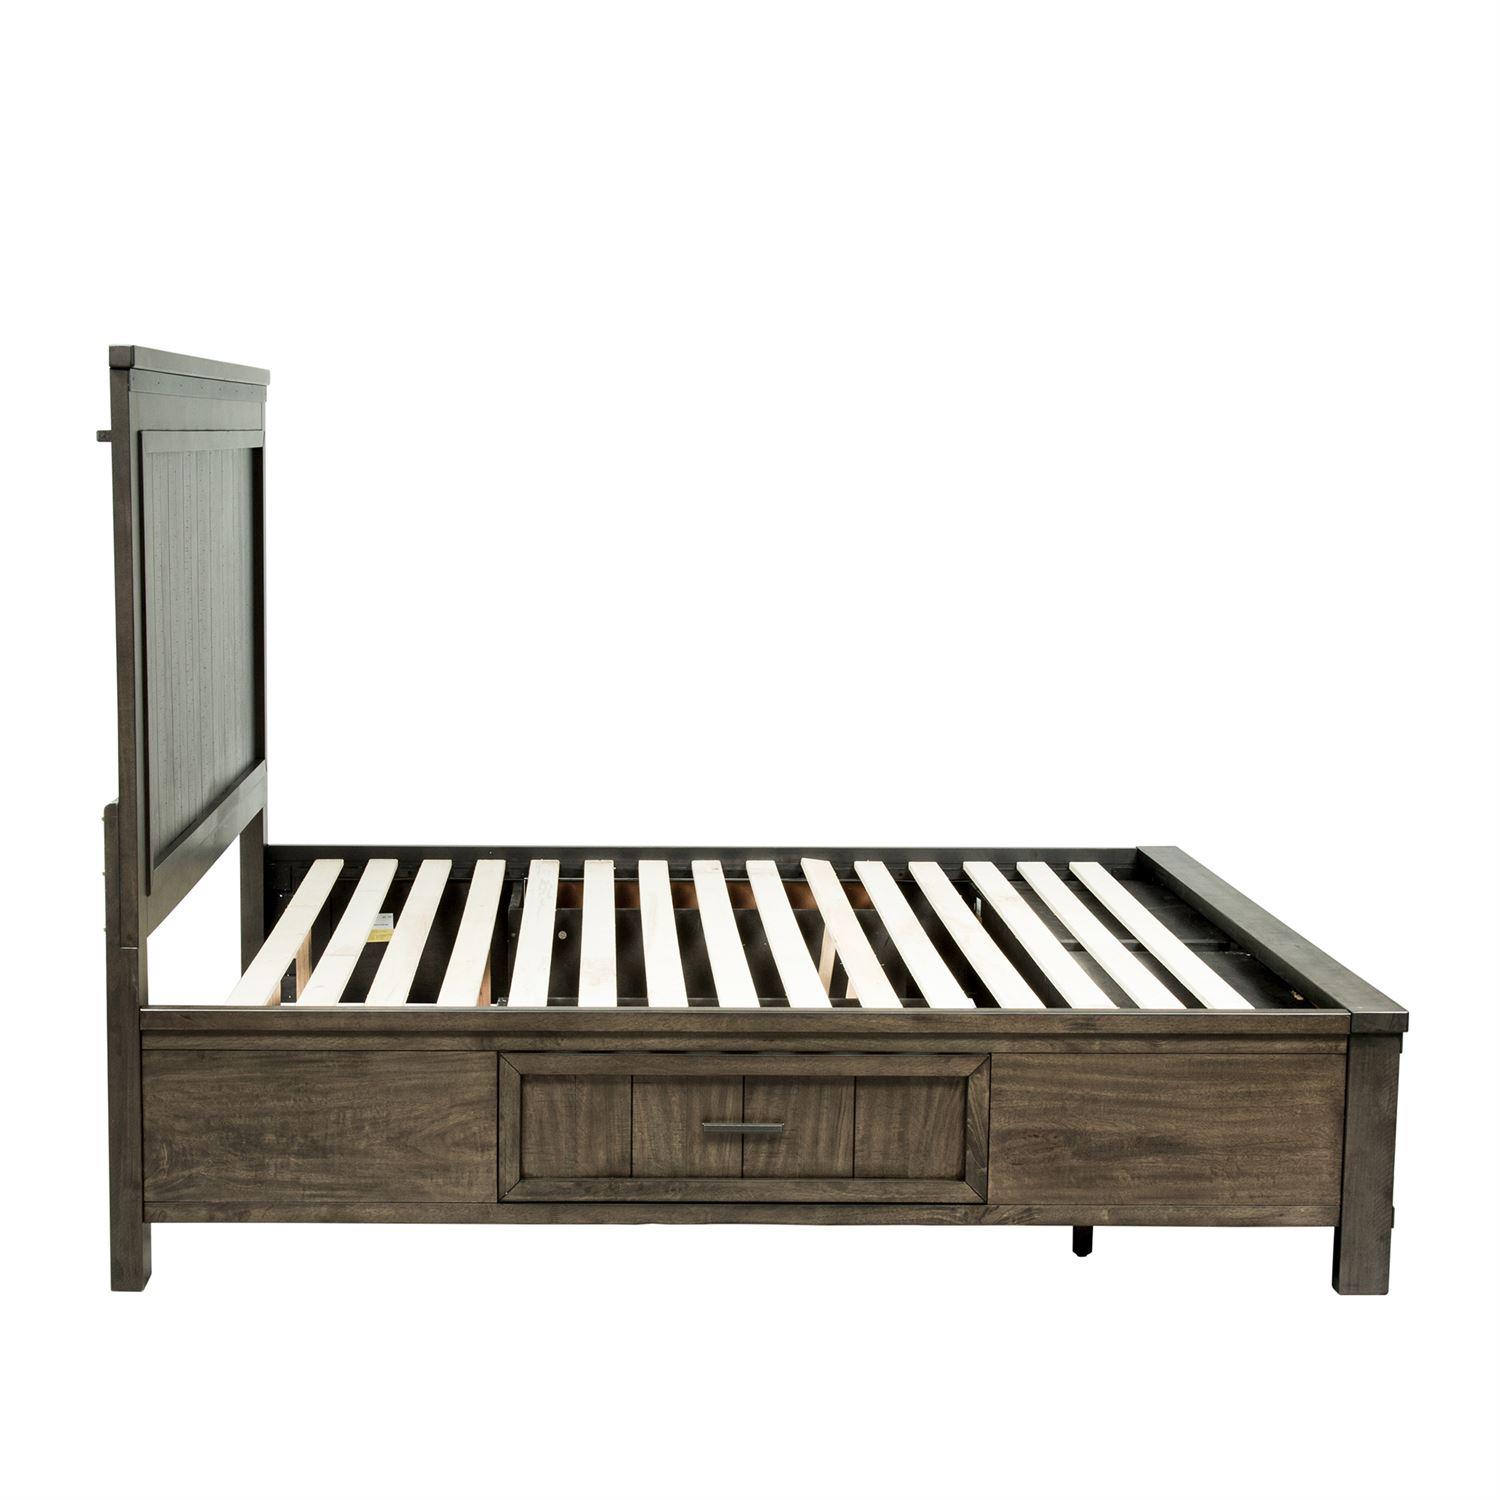 

                    
Liberty Furniture Thornwood Hills  (759-BR) Storage Bed Storage Bed Gray  Purchase 
